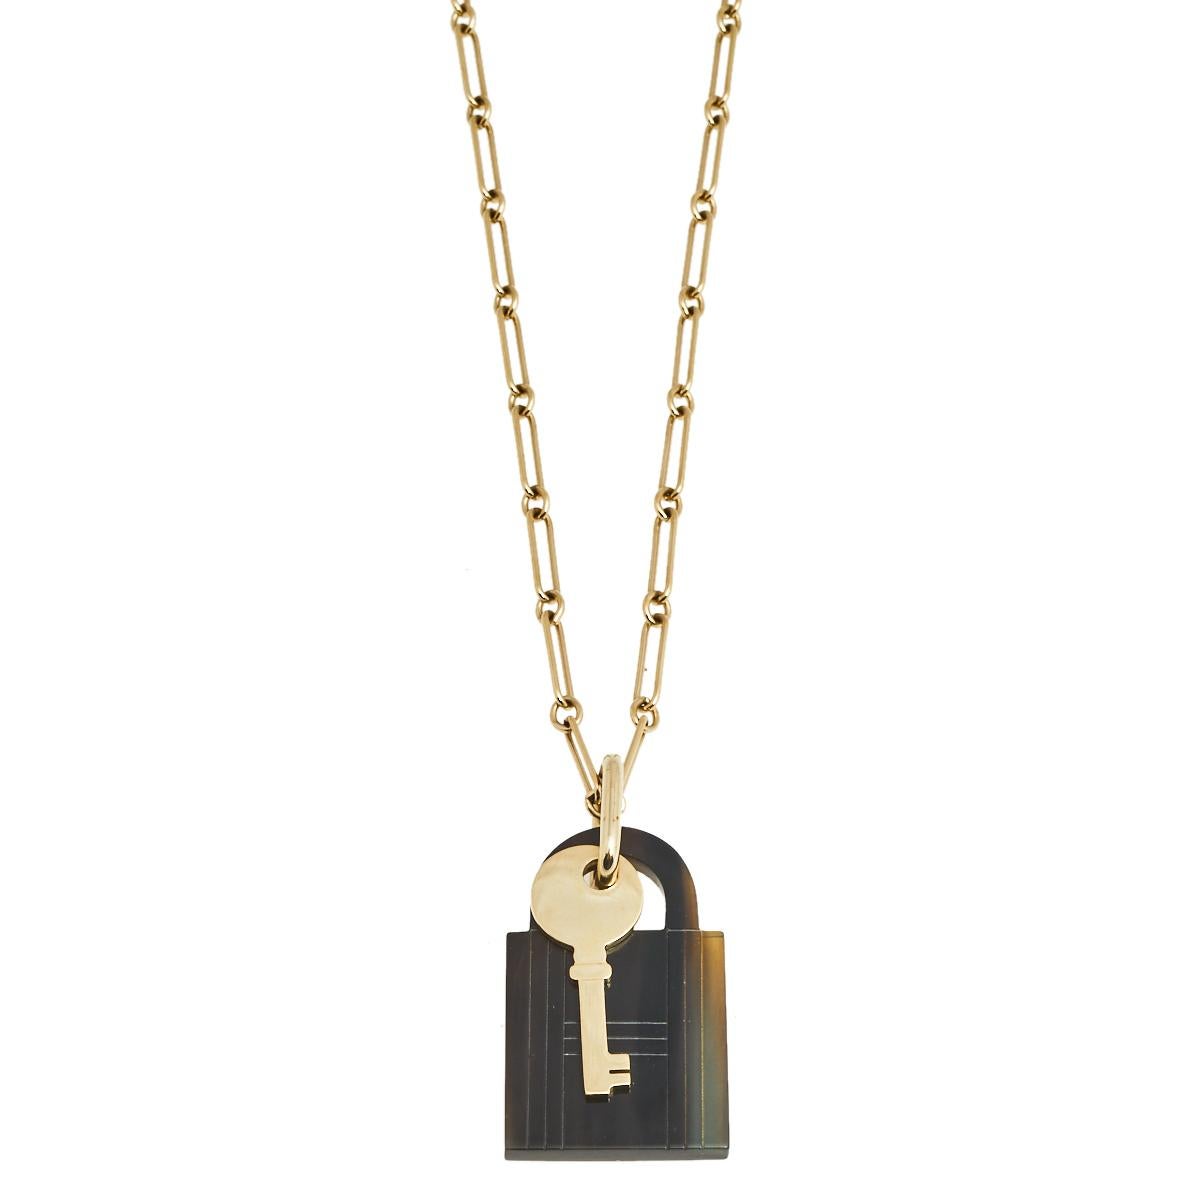 The link necklace by Hermes will adorn any outfit with a sophisticated charm. Crafted from gold-tone metal, it is equipped with a lock and key pendant along with a lobster claw closure attached to the brand plaque. Its elegant design will match with